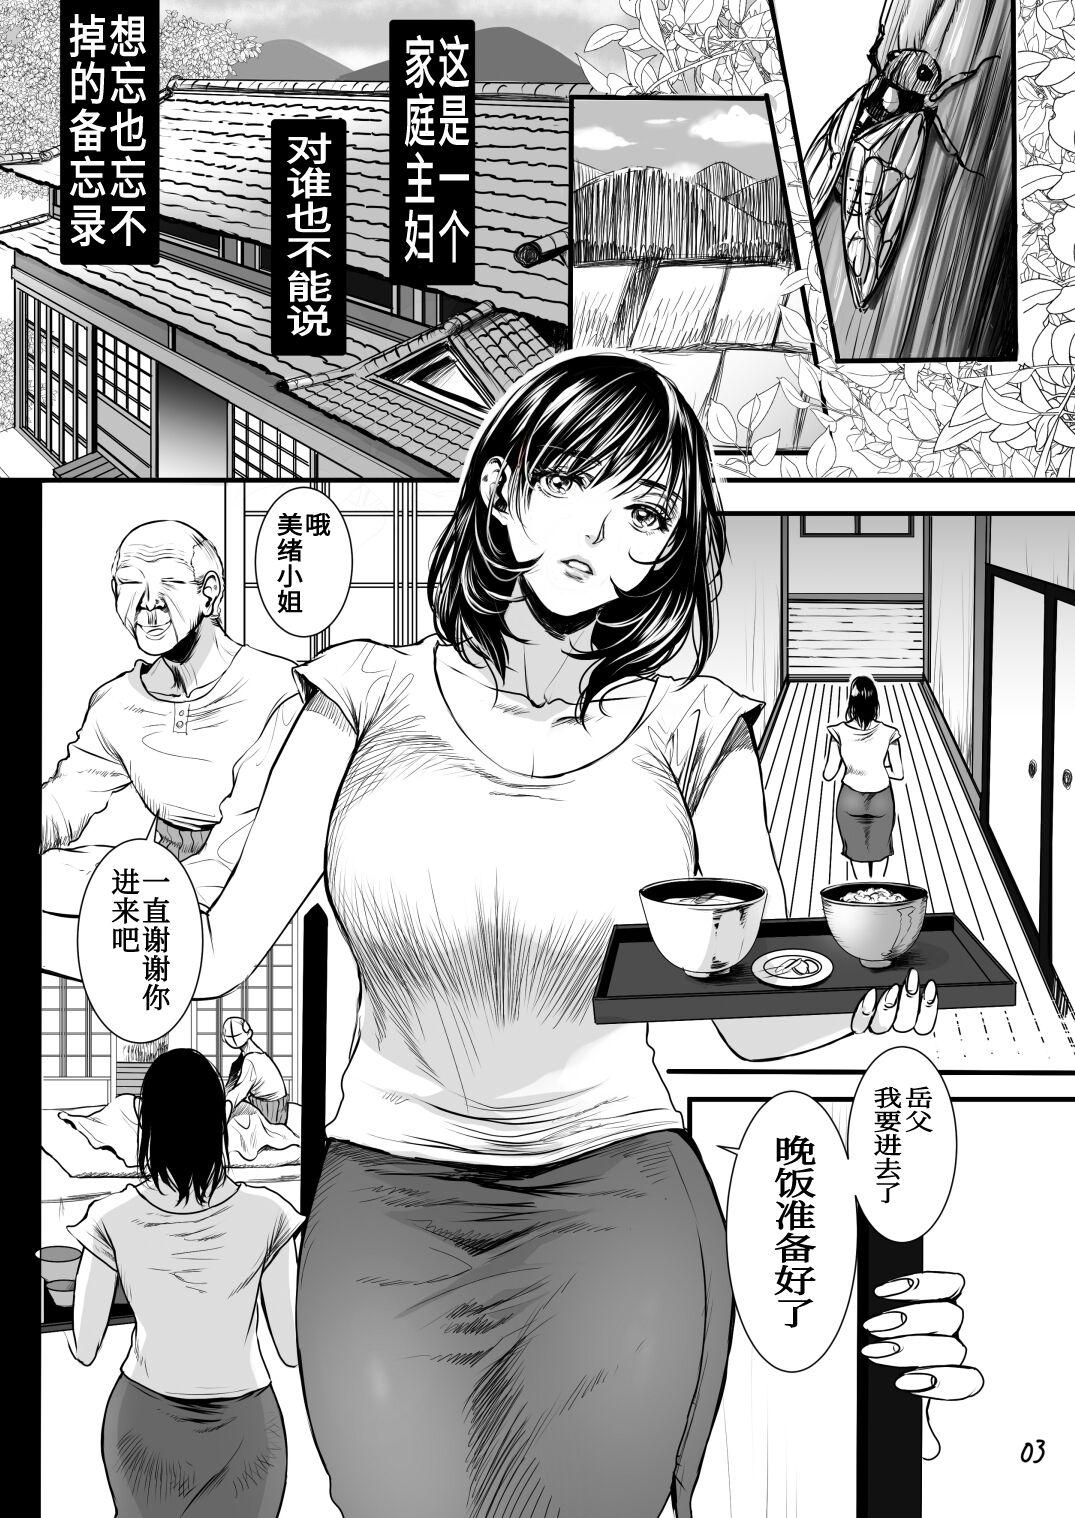 Soapy 老練兵（机翻） - Original Relax - Page 2